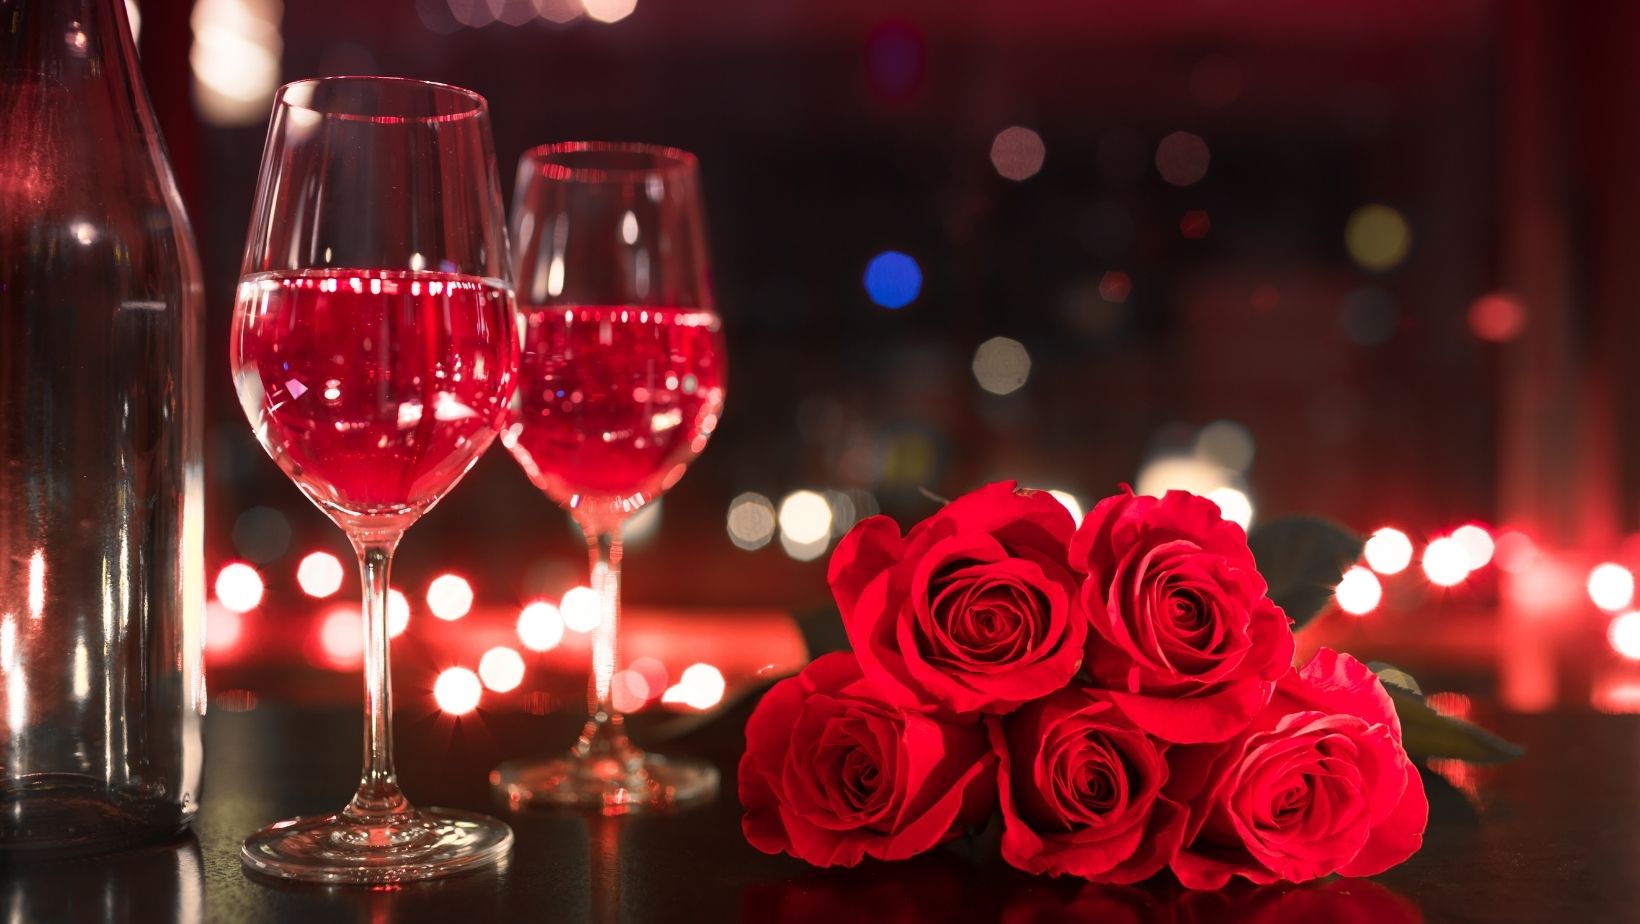 That’s Amore! Valentine’s Day Inspiration: Ideas for celebrating with your special someone